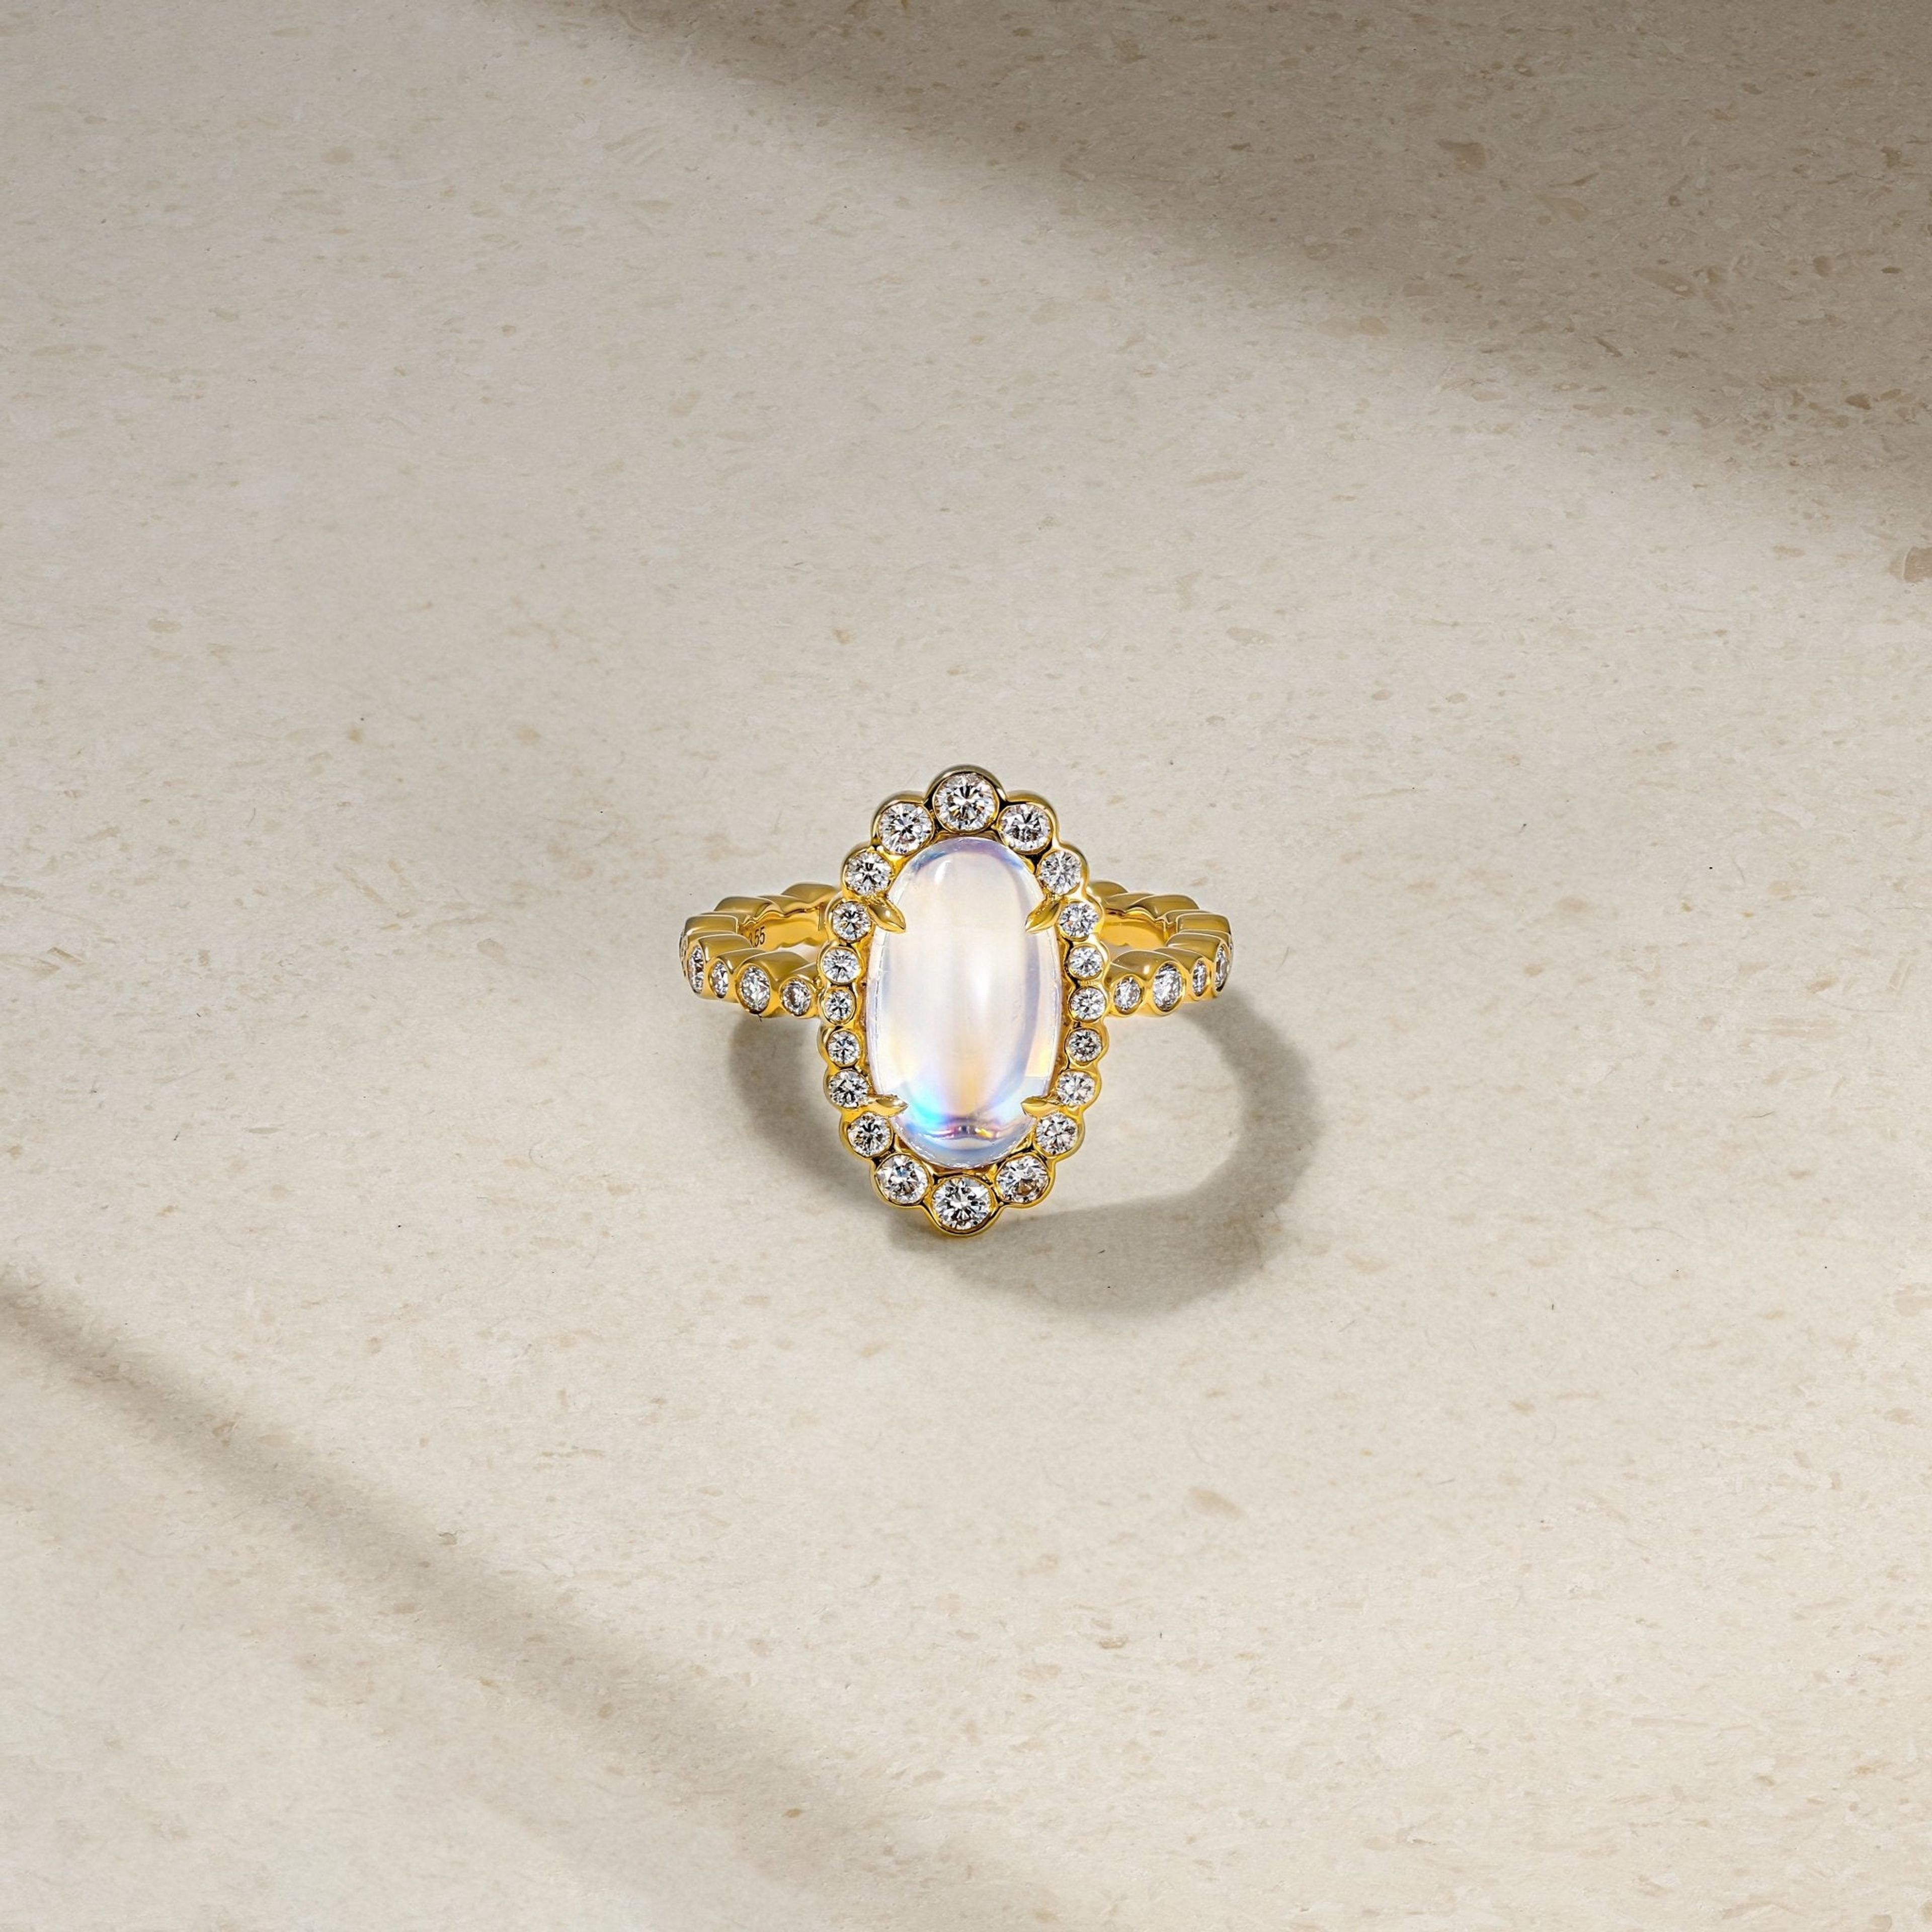 Bubbly One of a Kind Moonstone and Diamond Ring